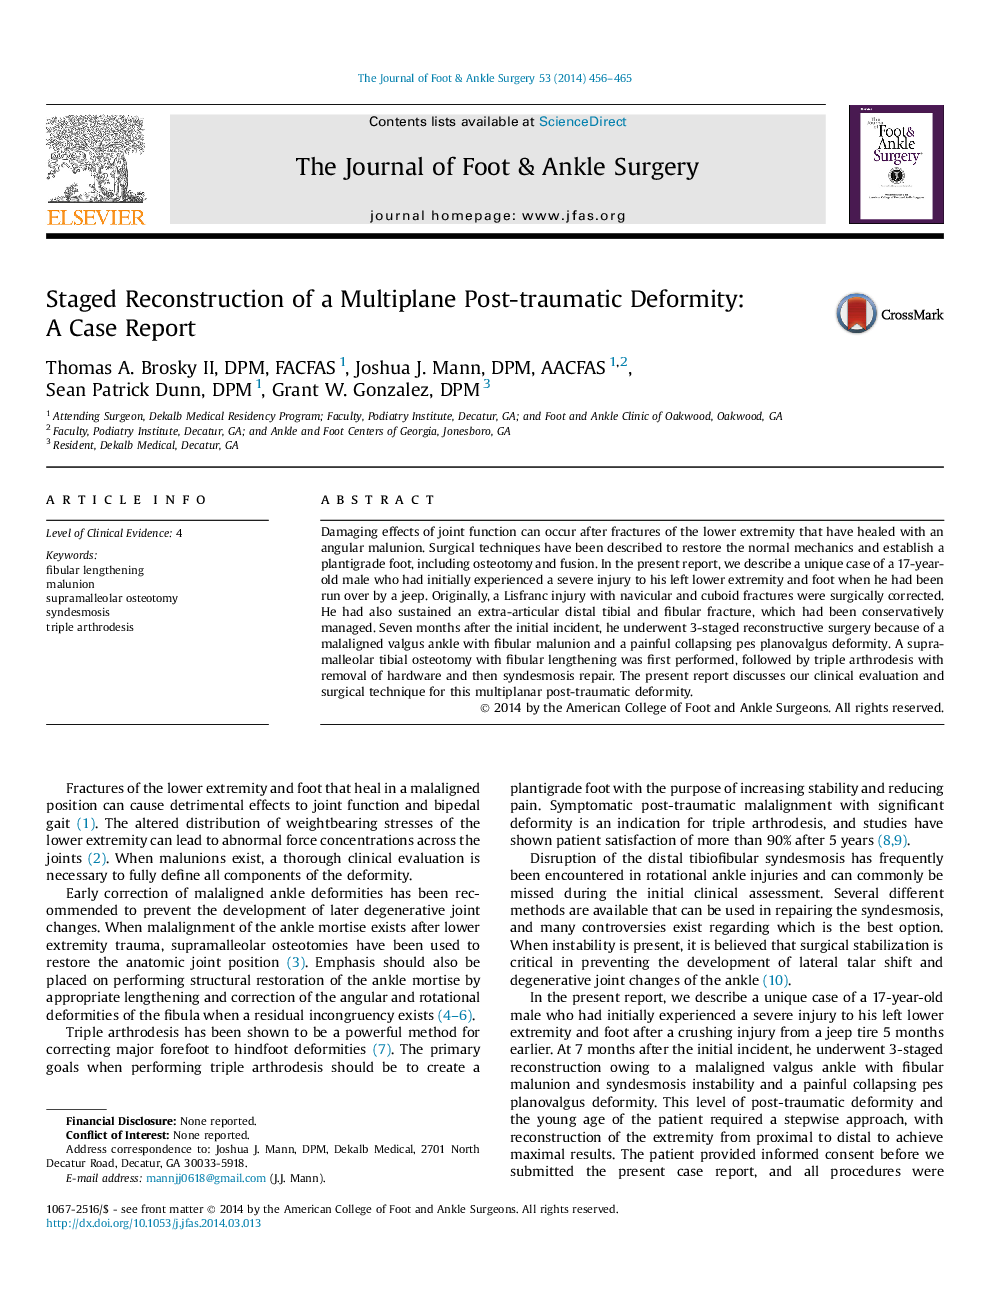 Staged Reconstruction of a Multiplane Post-traumatic Deformity: A Case Report 